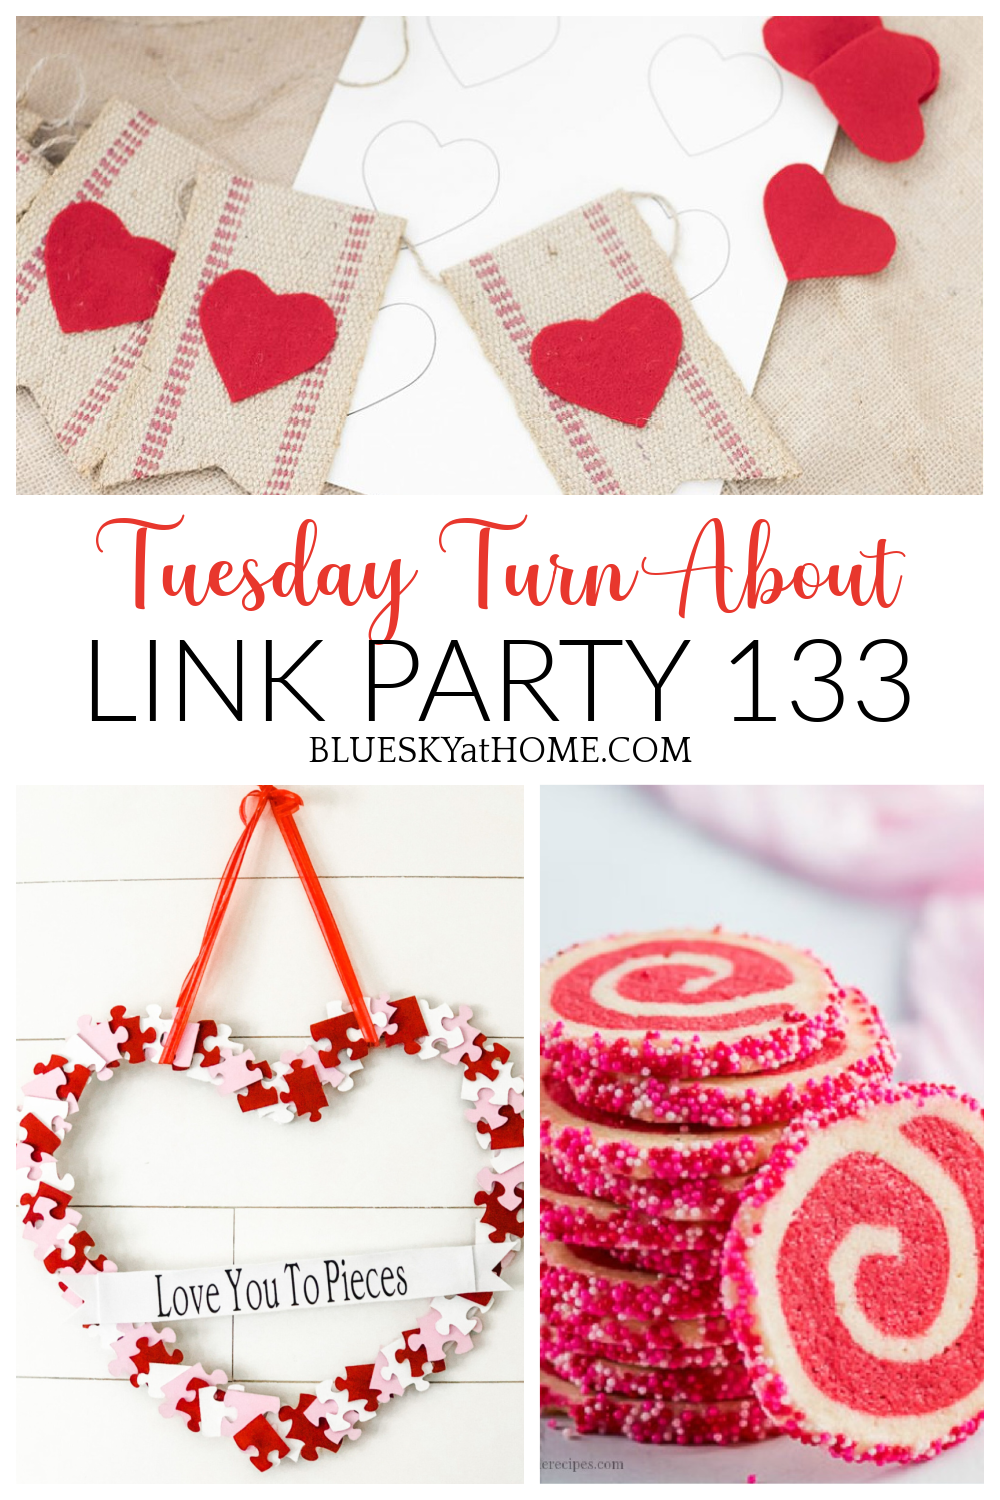 Tuesday Turn About Link Party 133